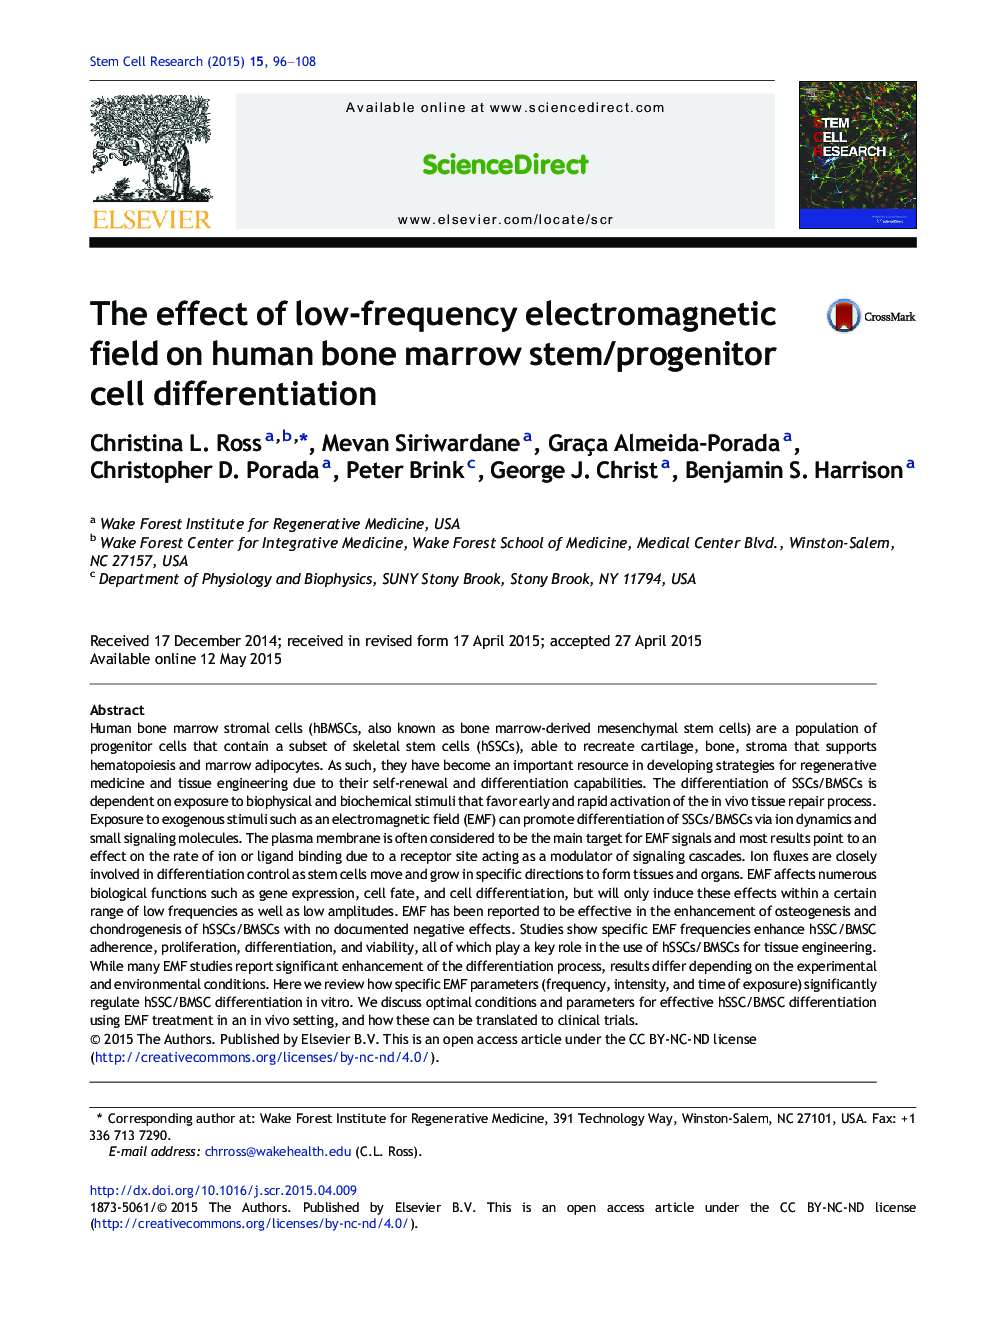 The effect of low-frequency electromagnetic field on human bone marrow stem/progenitor cell differentiation